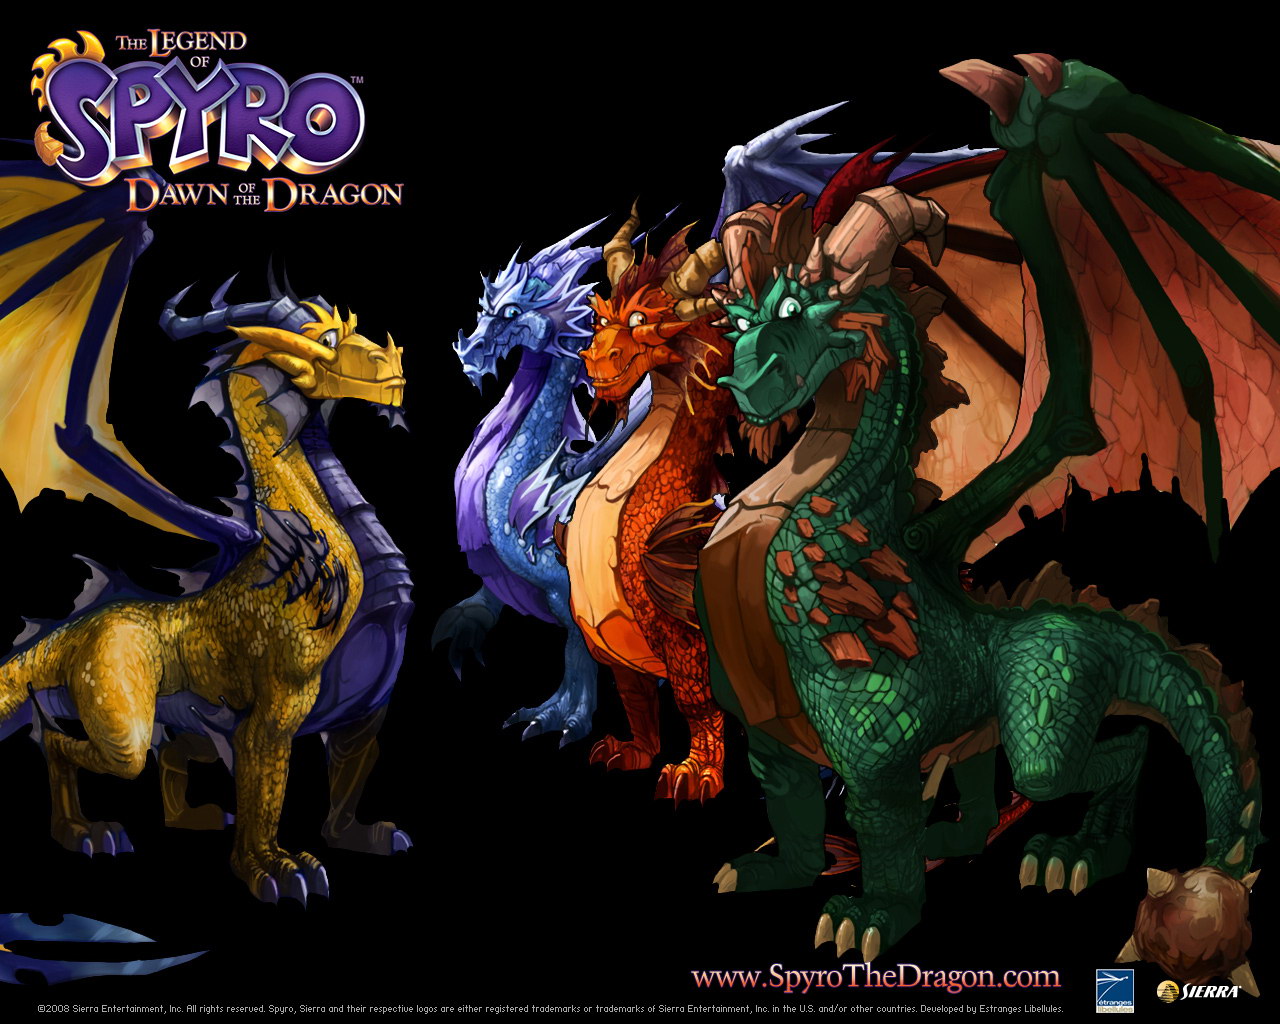 Group   The Legend of Spyro Dawn of the Dragon